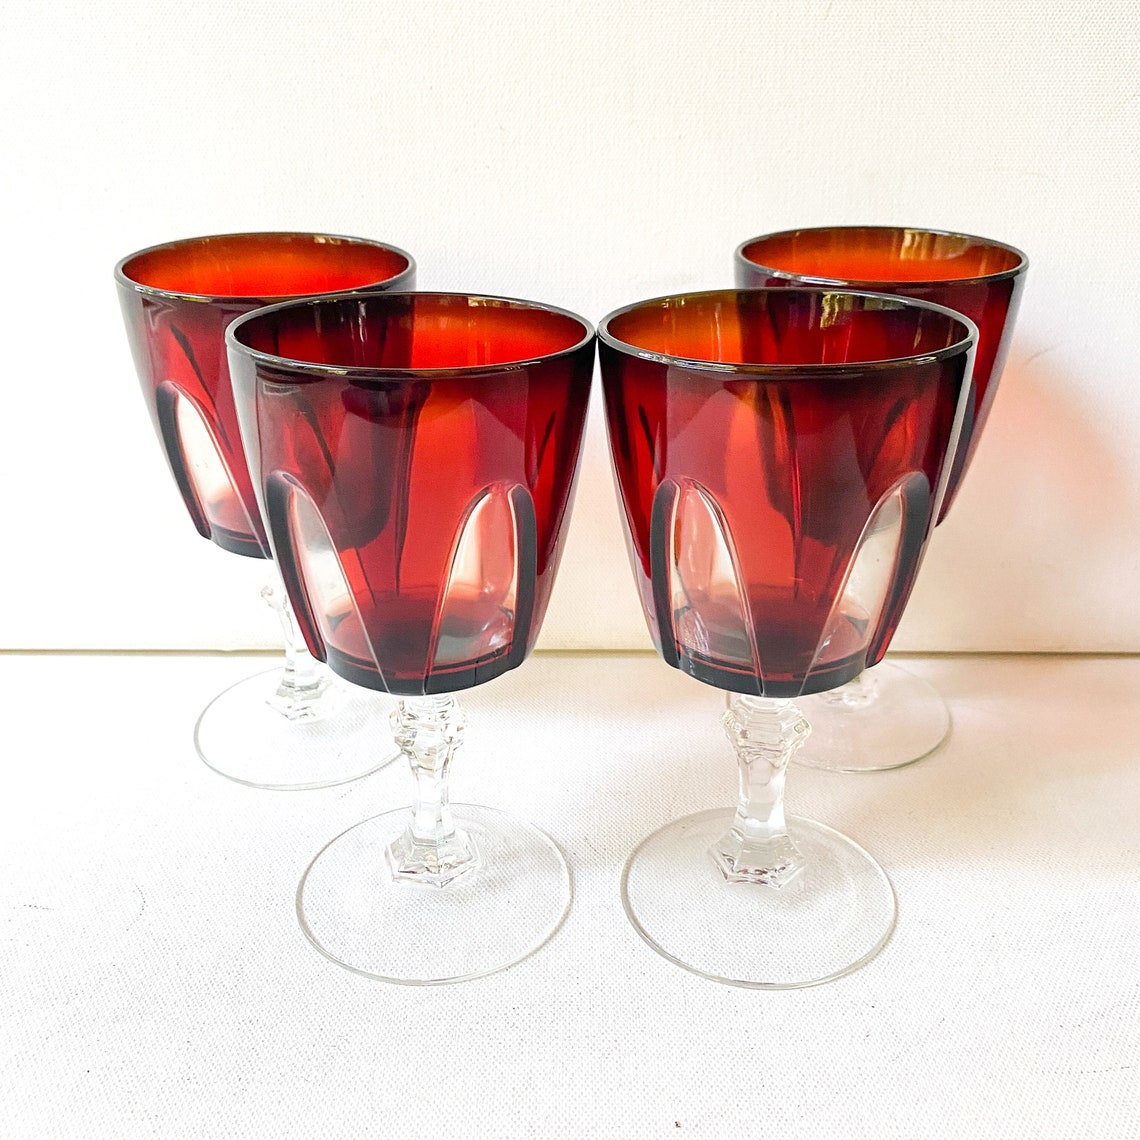 Special Order Red Stemmed Wine Glasses Luminarc Cristal D' Arques Durand  Set of 7 Red Stemware Arcoroc France Retro 80's 